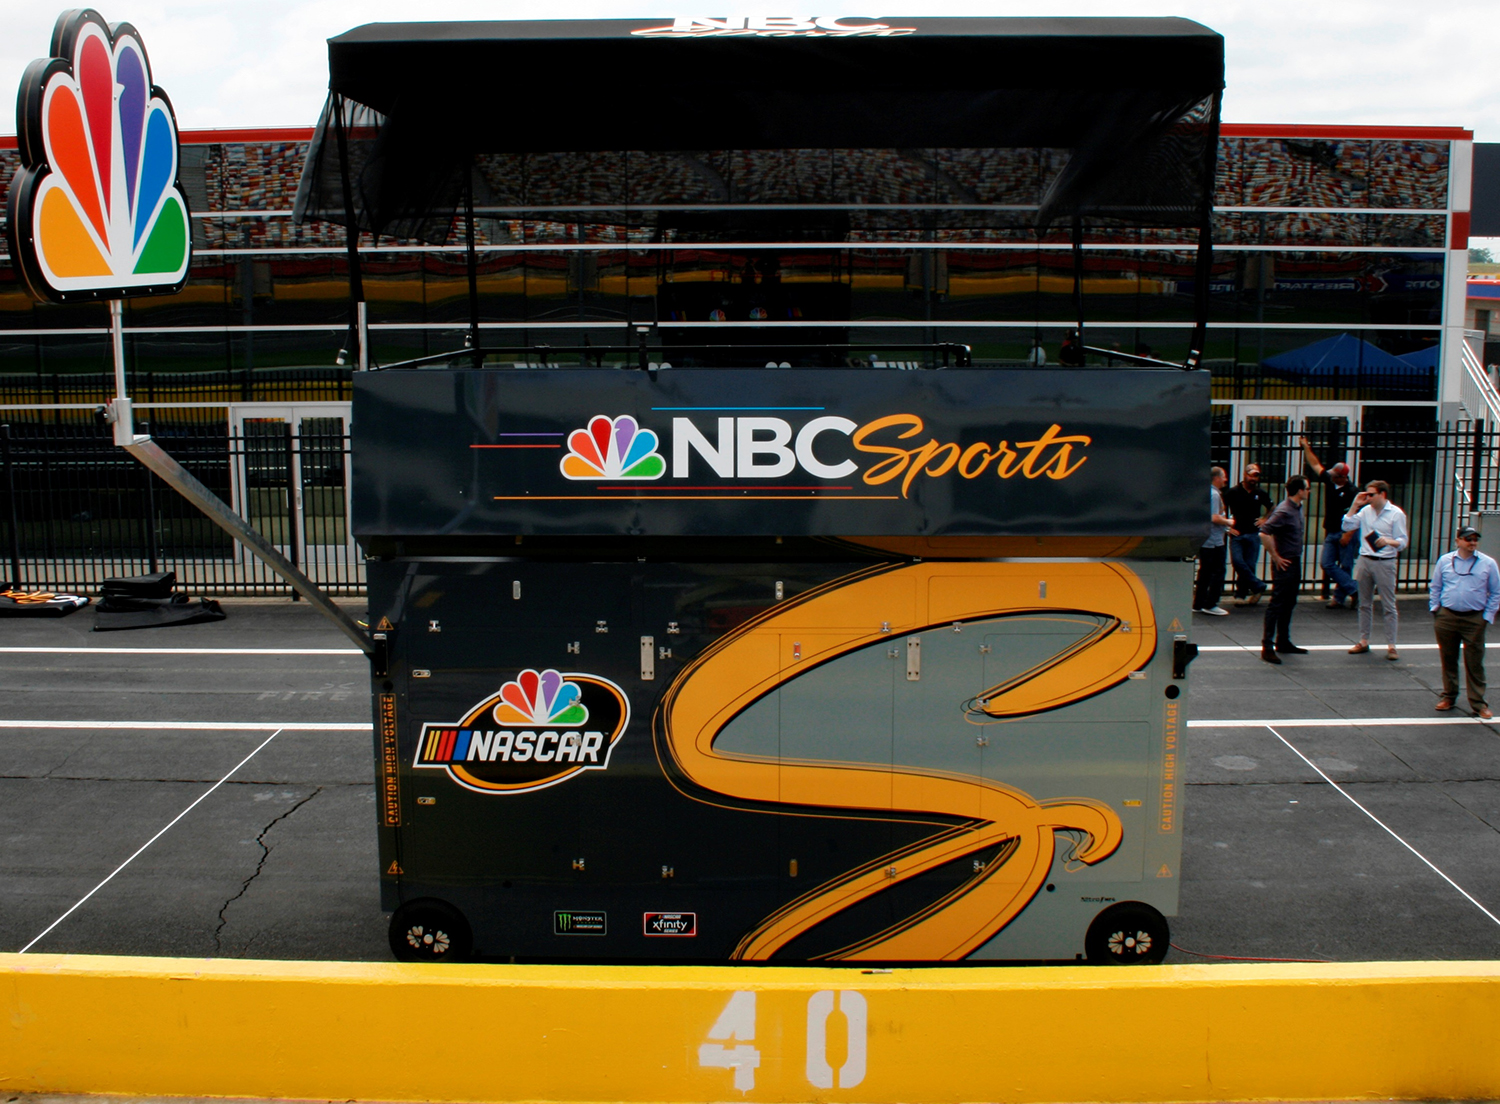 NBC Sports Spreads Its Tech Feathers With New Peacock Pit Box on NASCAR Coverage